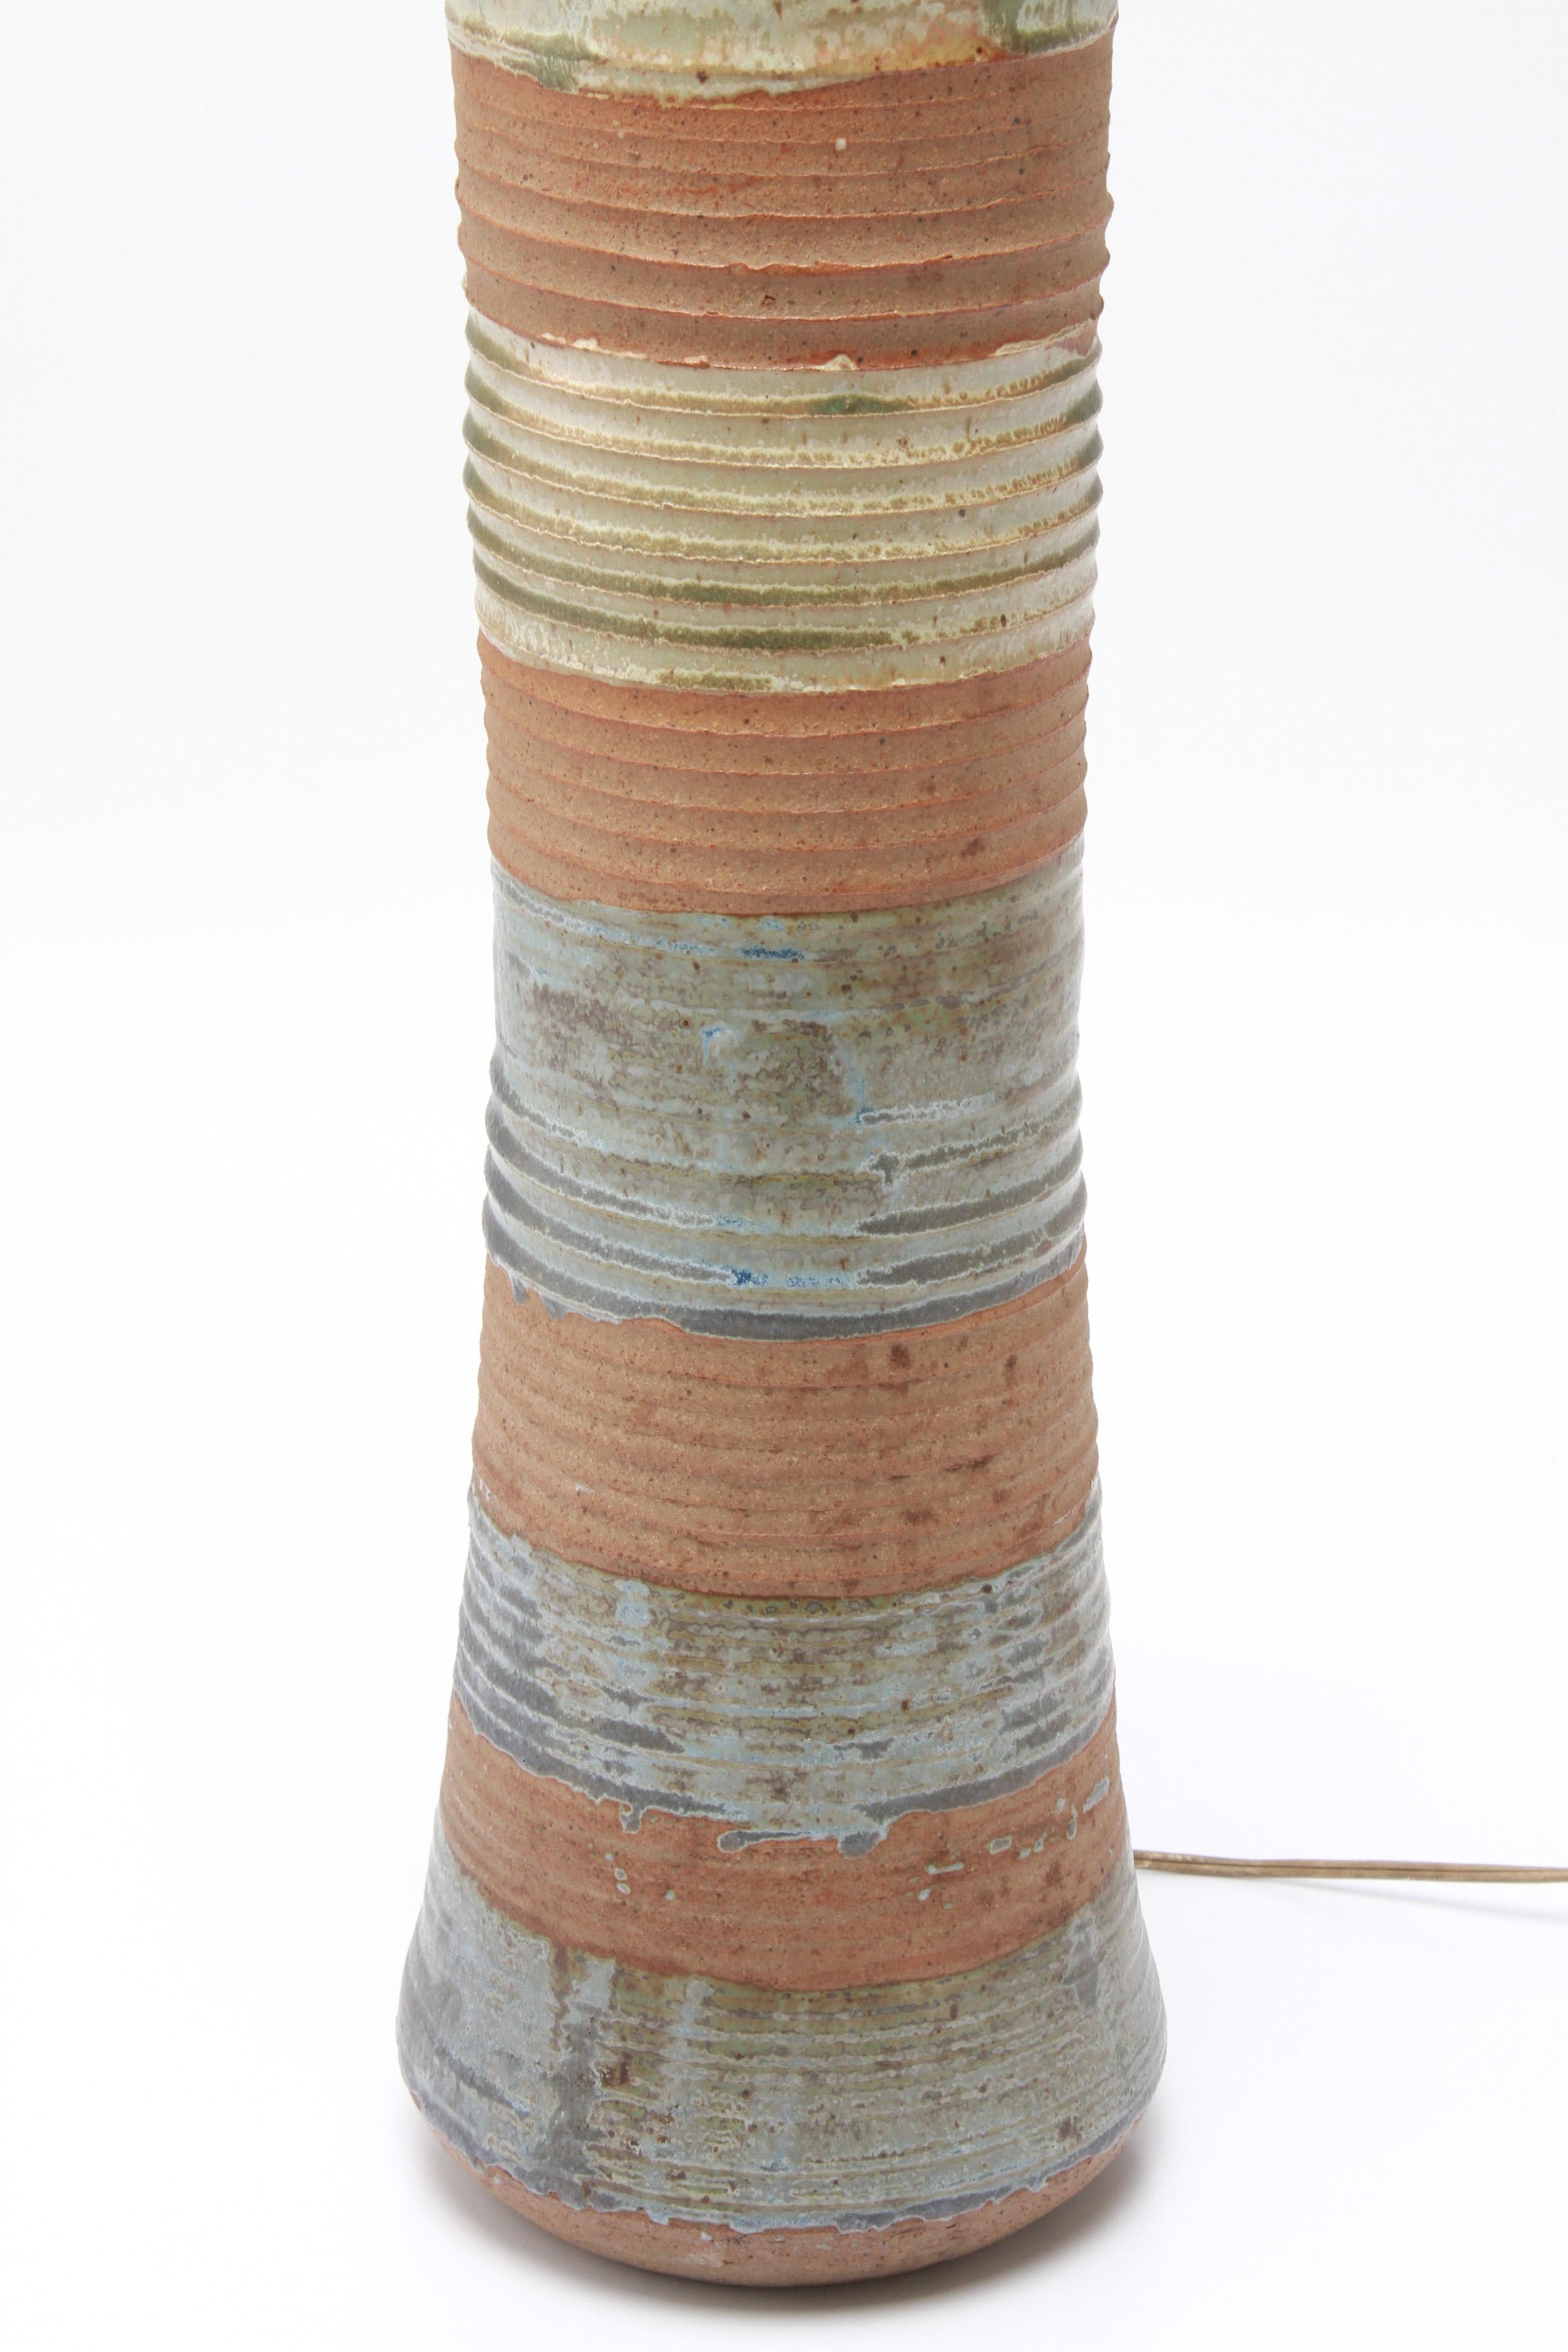 American Mid-Century Modern stoneware art pottery table lamp designed by Karen Karnes, (American, 1925-2016). The piece has a polychrome glaze with alternating horizontal bands and is signed with an impressed artist's monogram 